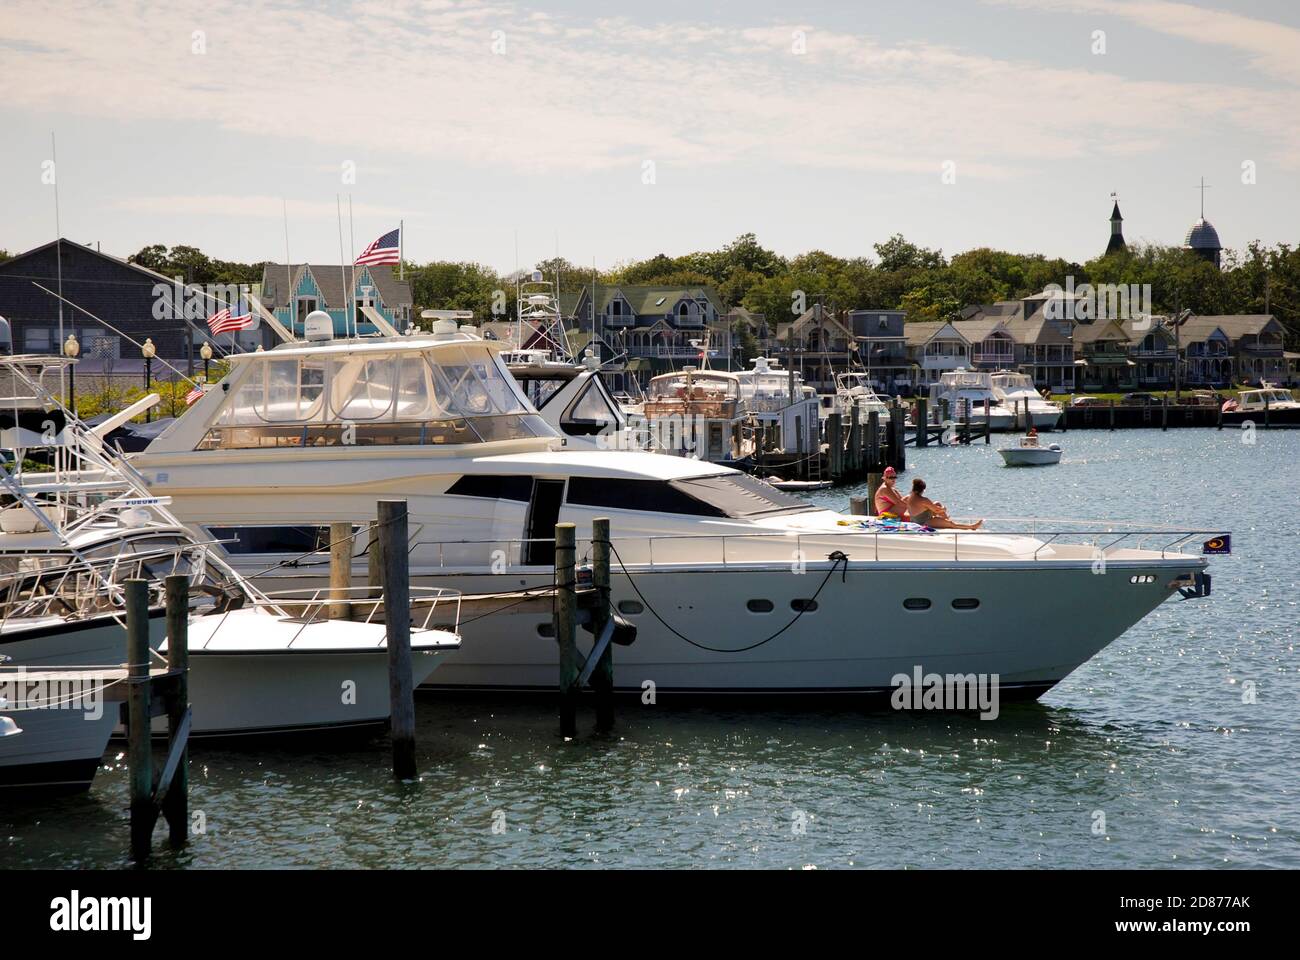 Martha's Vineyard, Massachusetts - September 2008: Two people sitting on a luxury motor boat moored in the harbor of Oak Bluffs Stock Photo